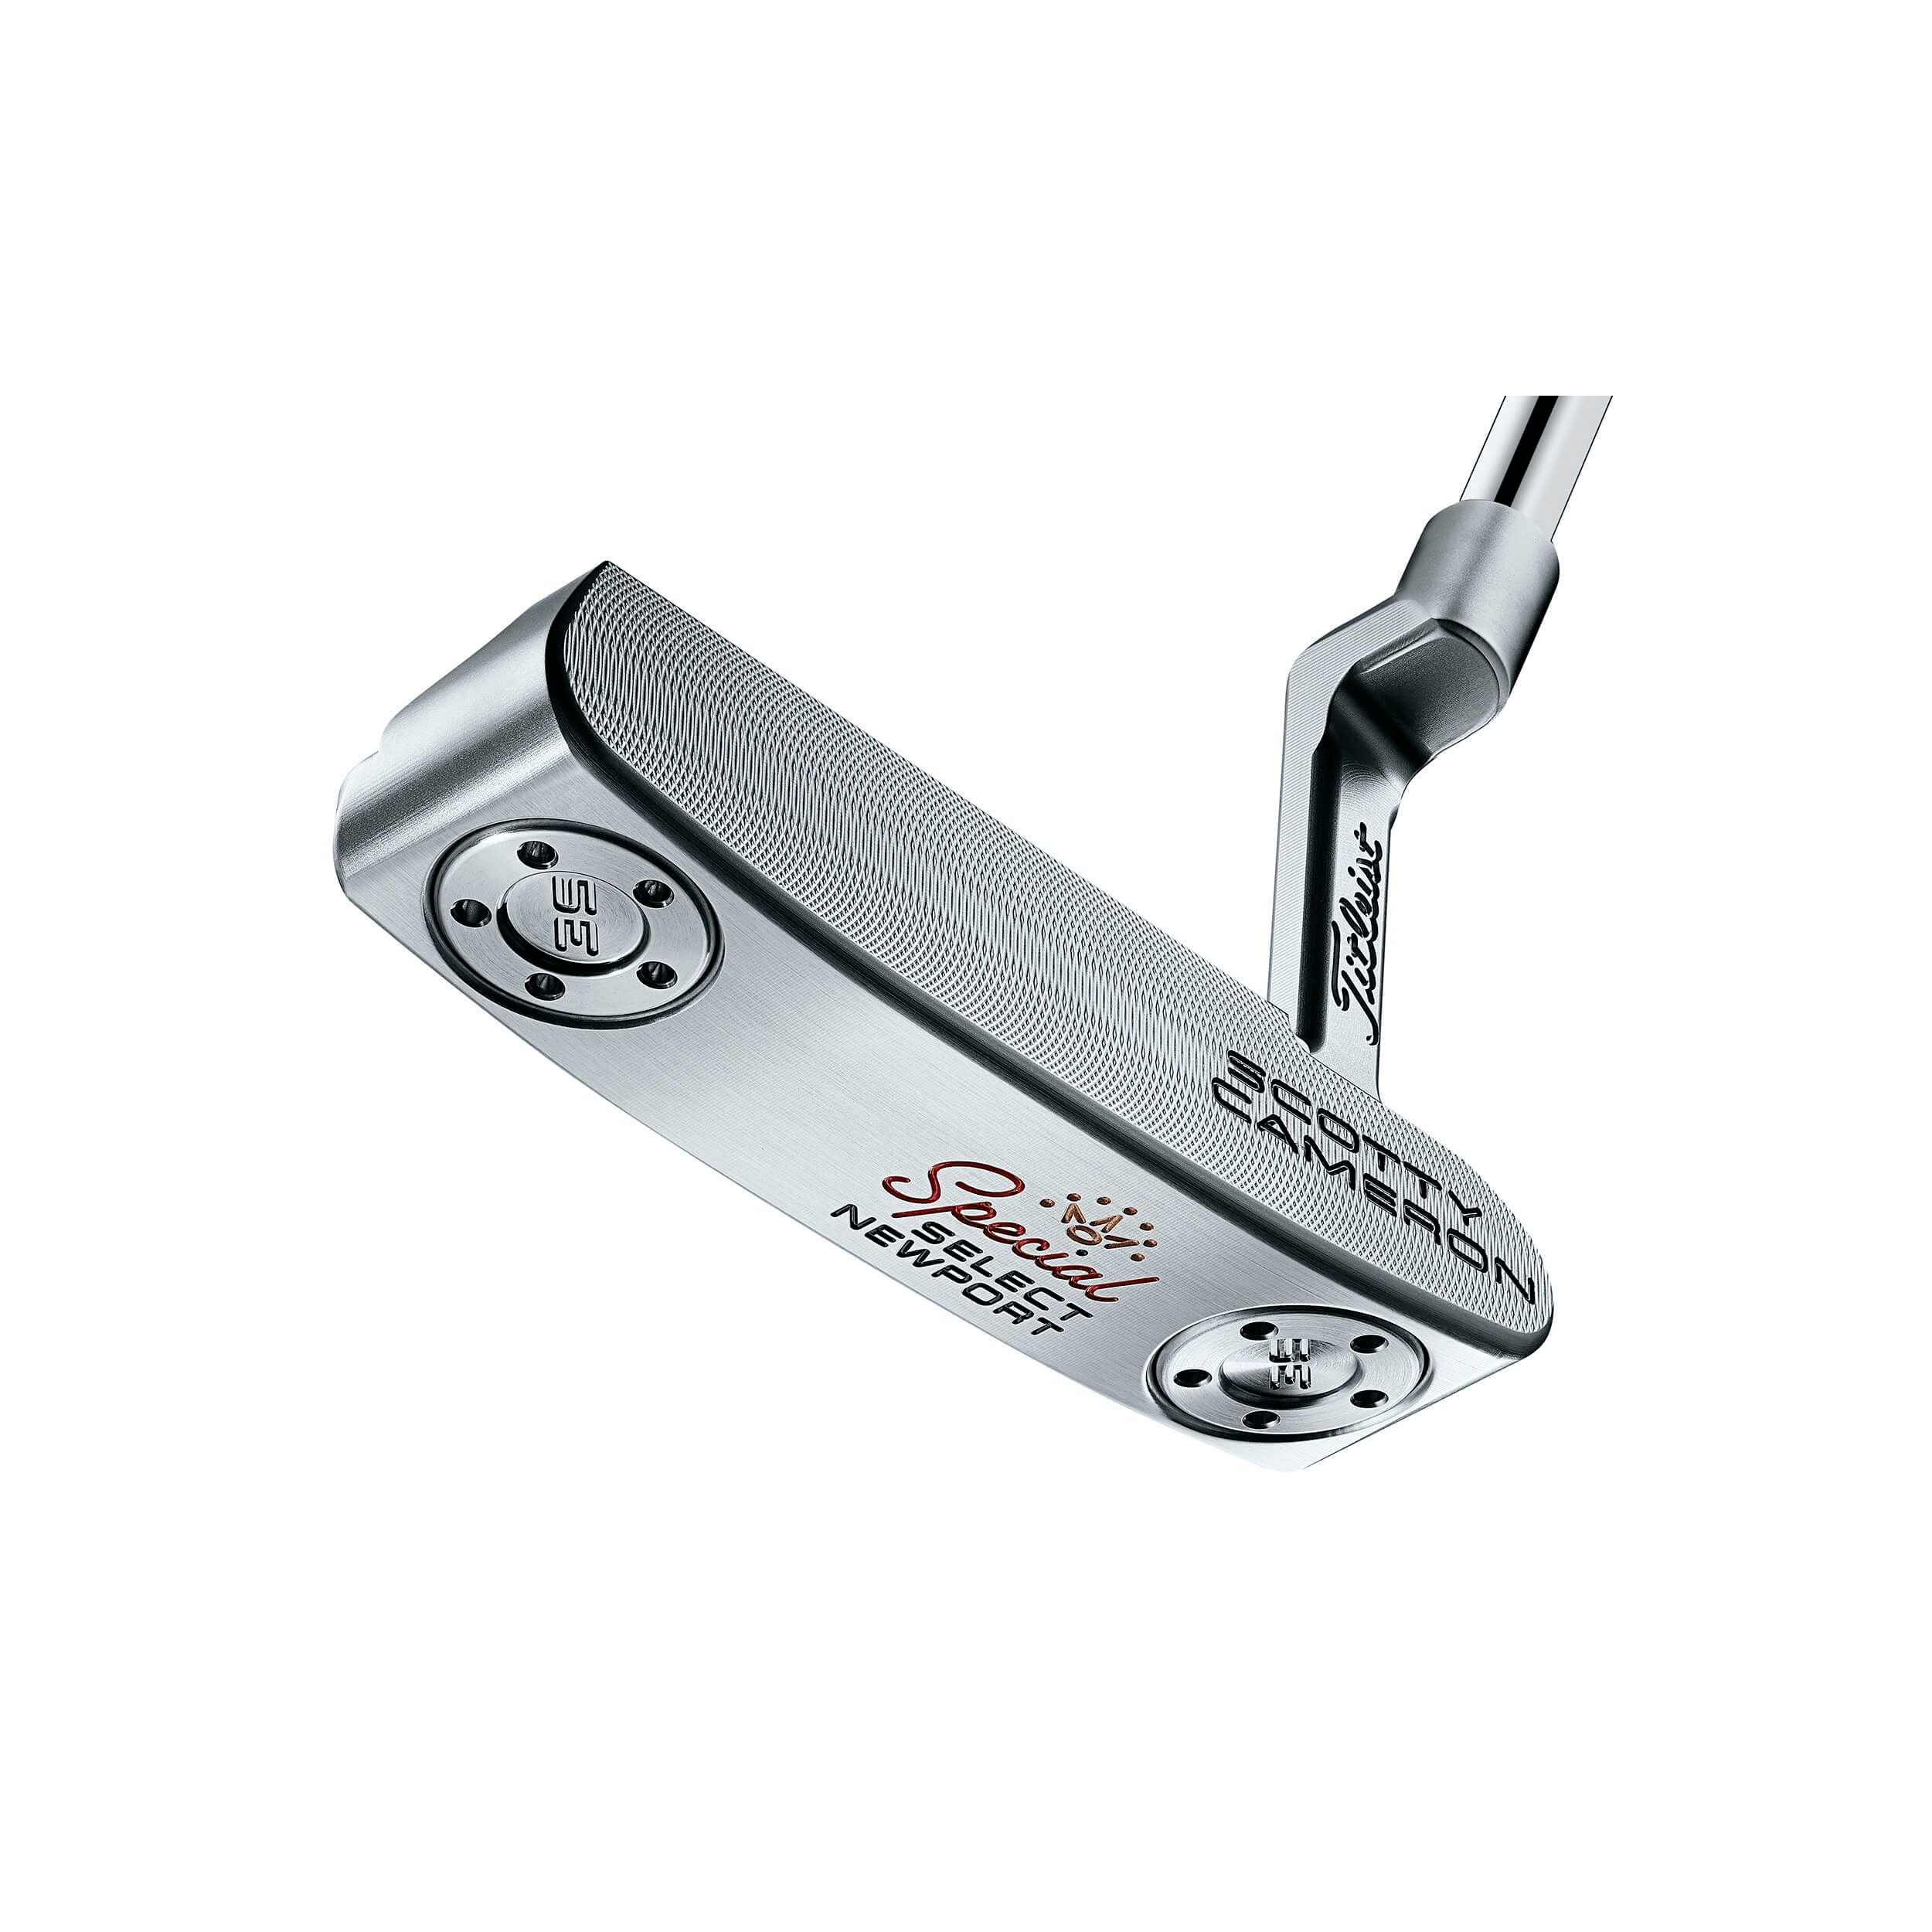 BY PUTTER SCOTTY CAMERON SELECT NEWPORT